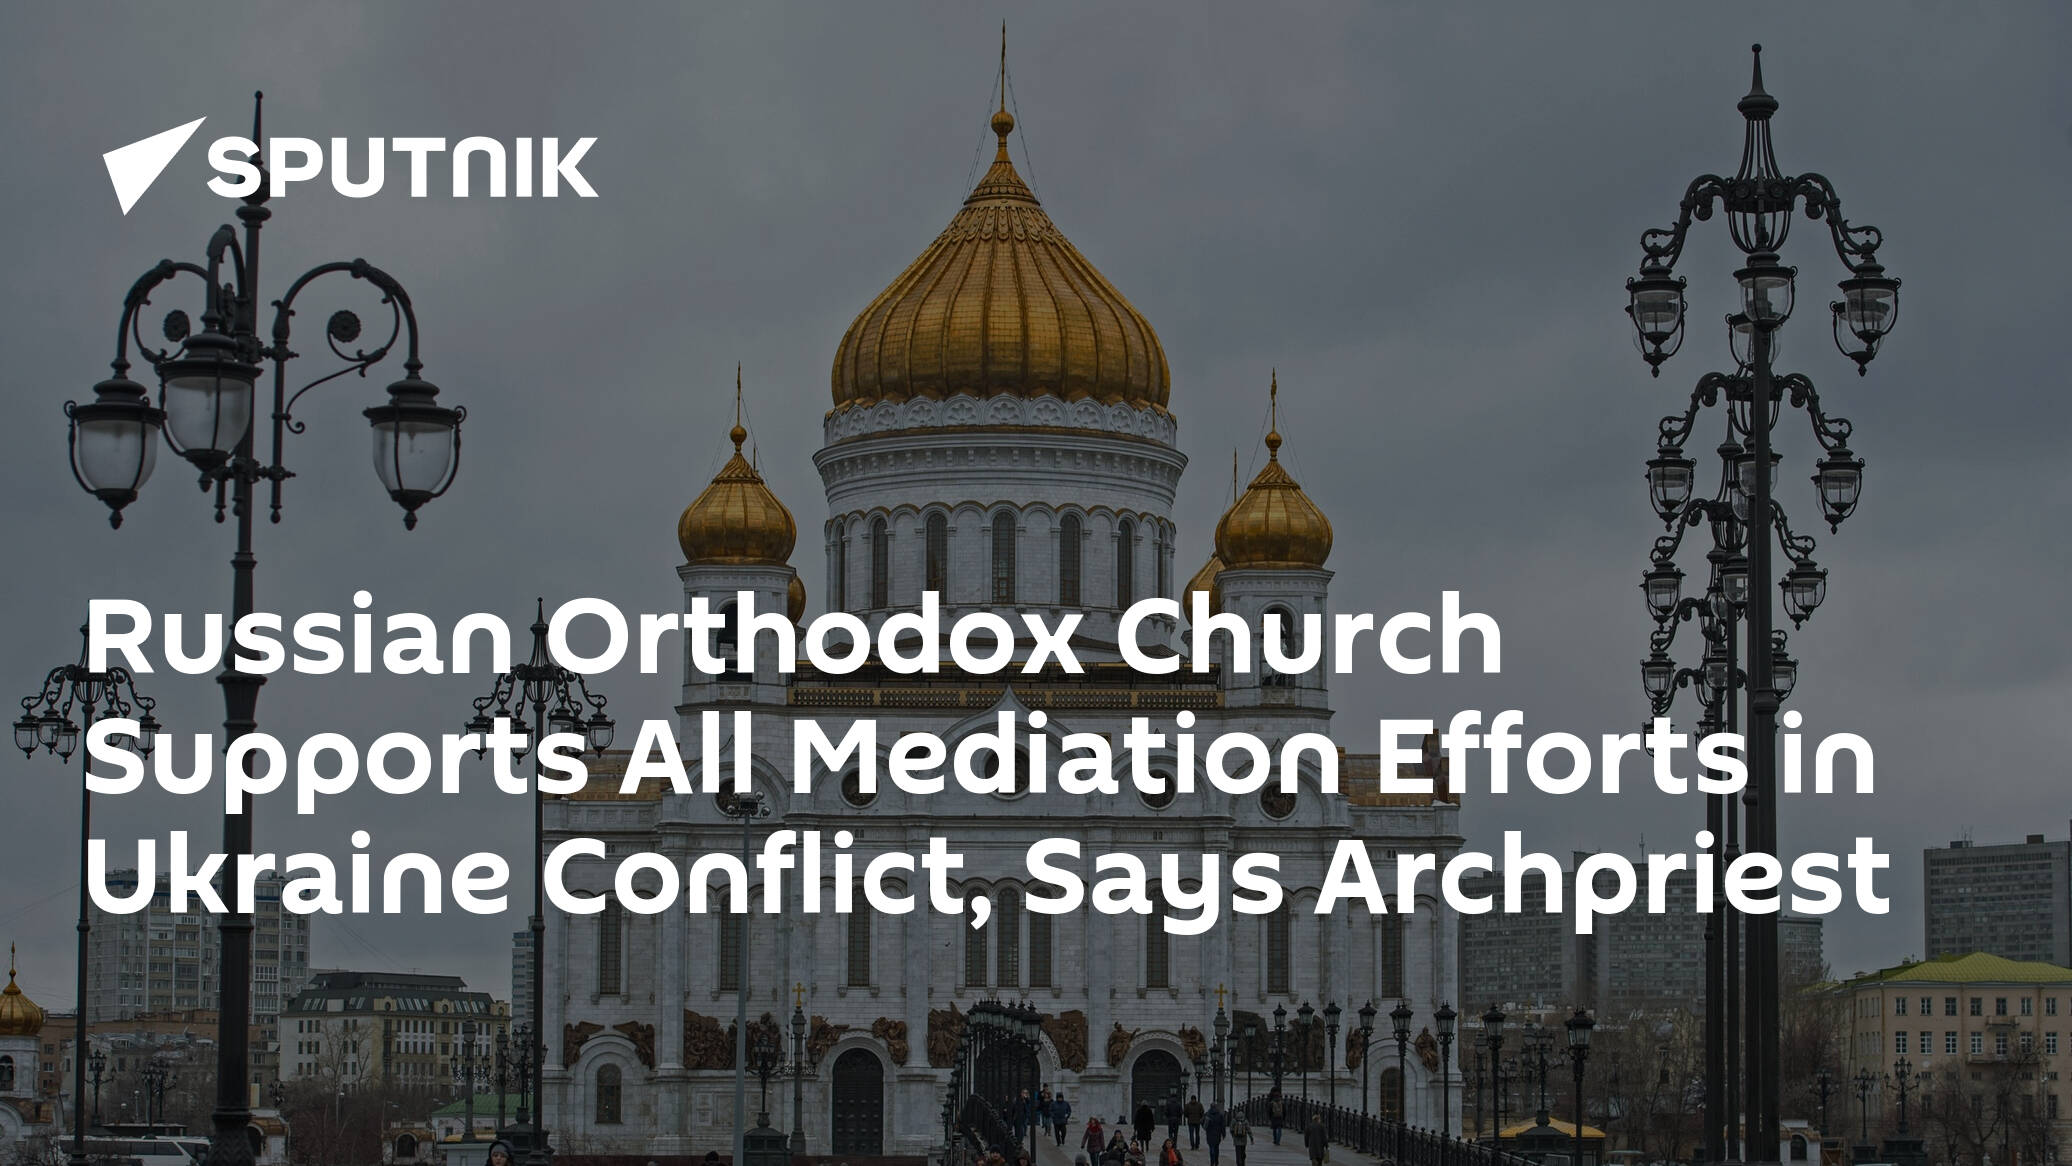 Russian Orthodox Church Supports All Mediation Efforts in Ukraine Conflict, Says Archpriest